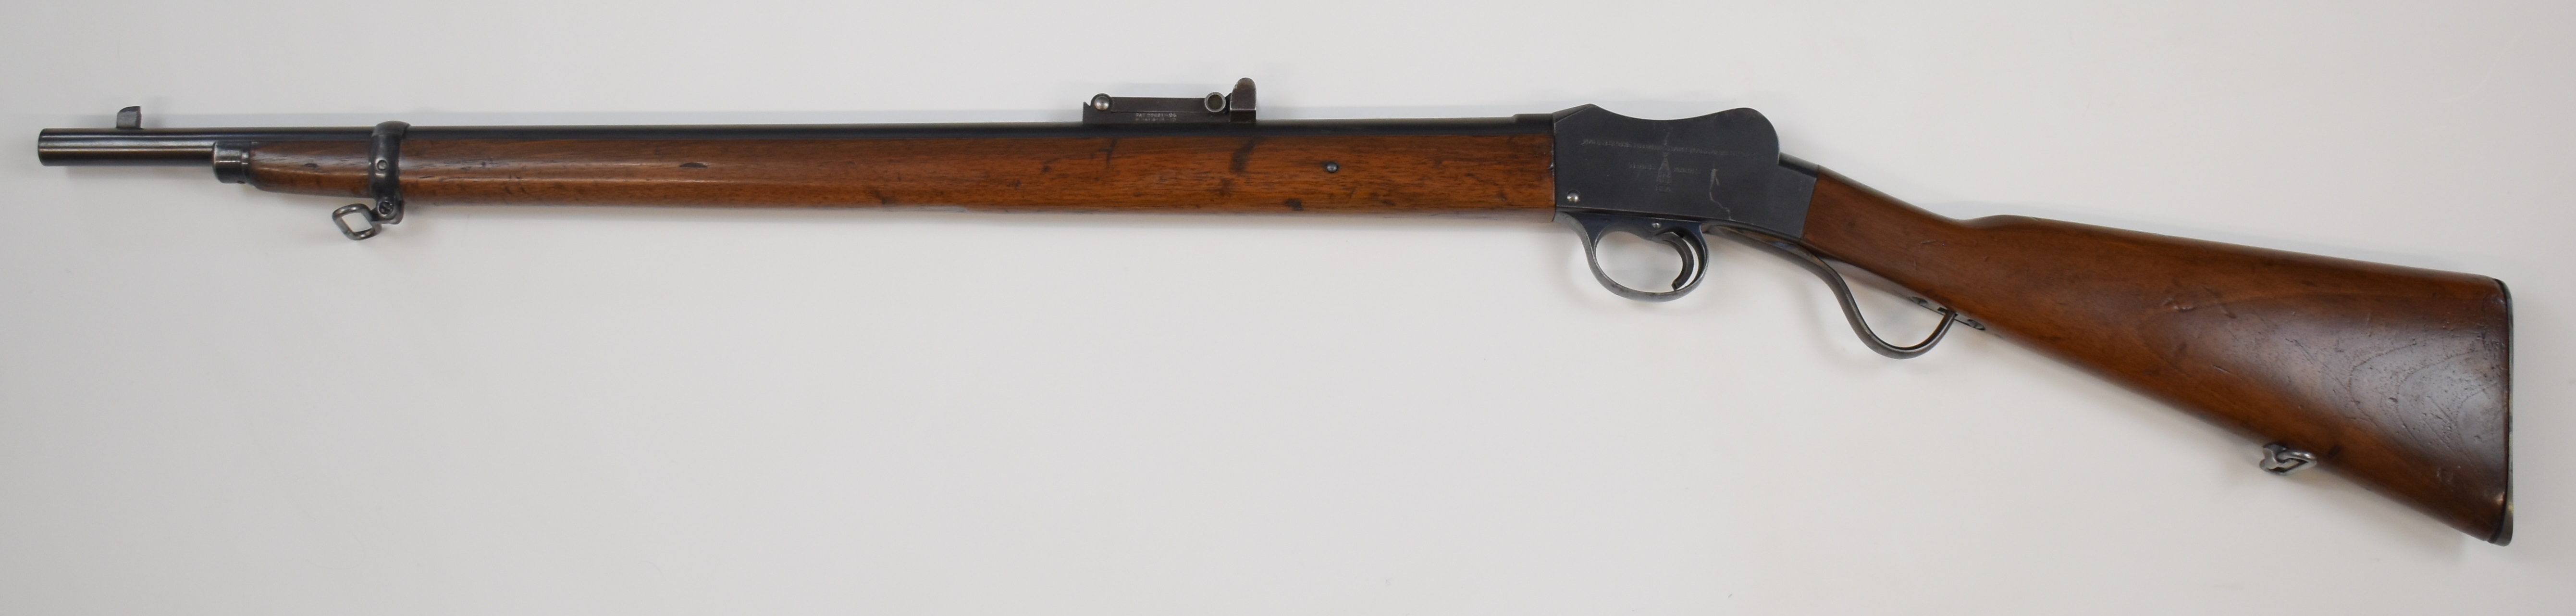 BSA Commonwealth of Australia .310 Cadet Martini underlever-action rifle with adjustable sights, - Image 7 of 10